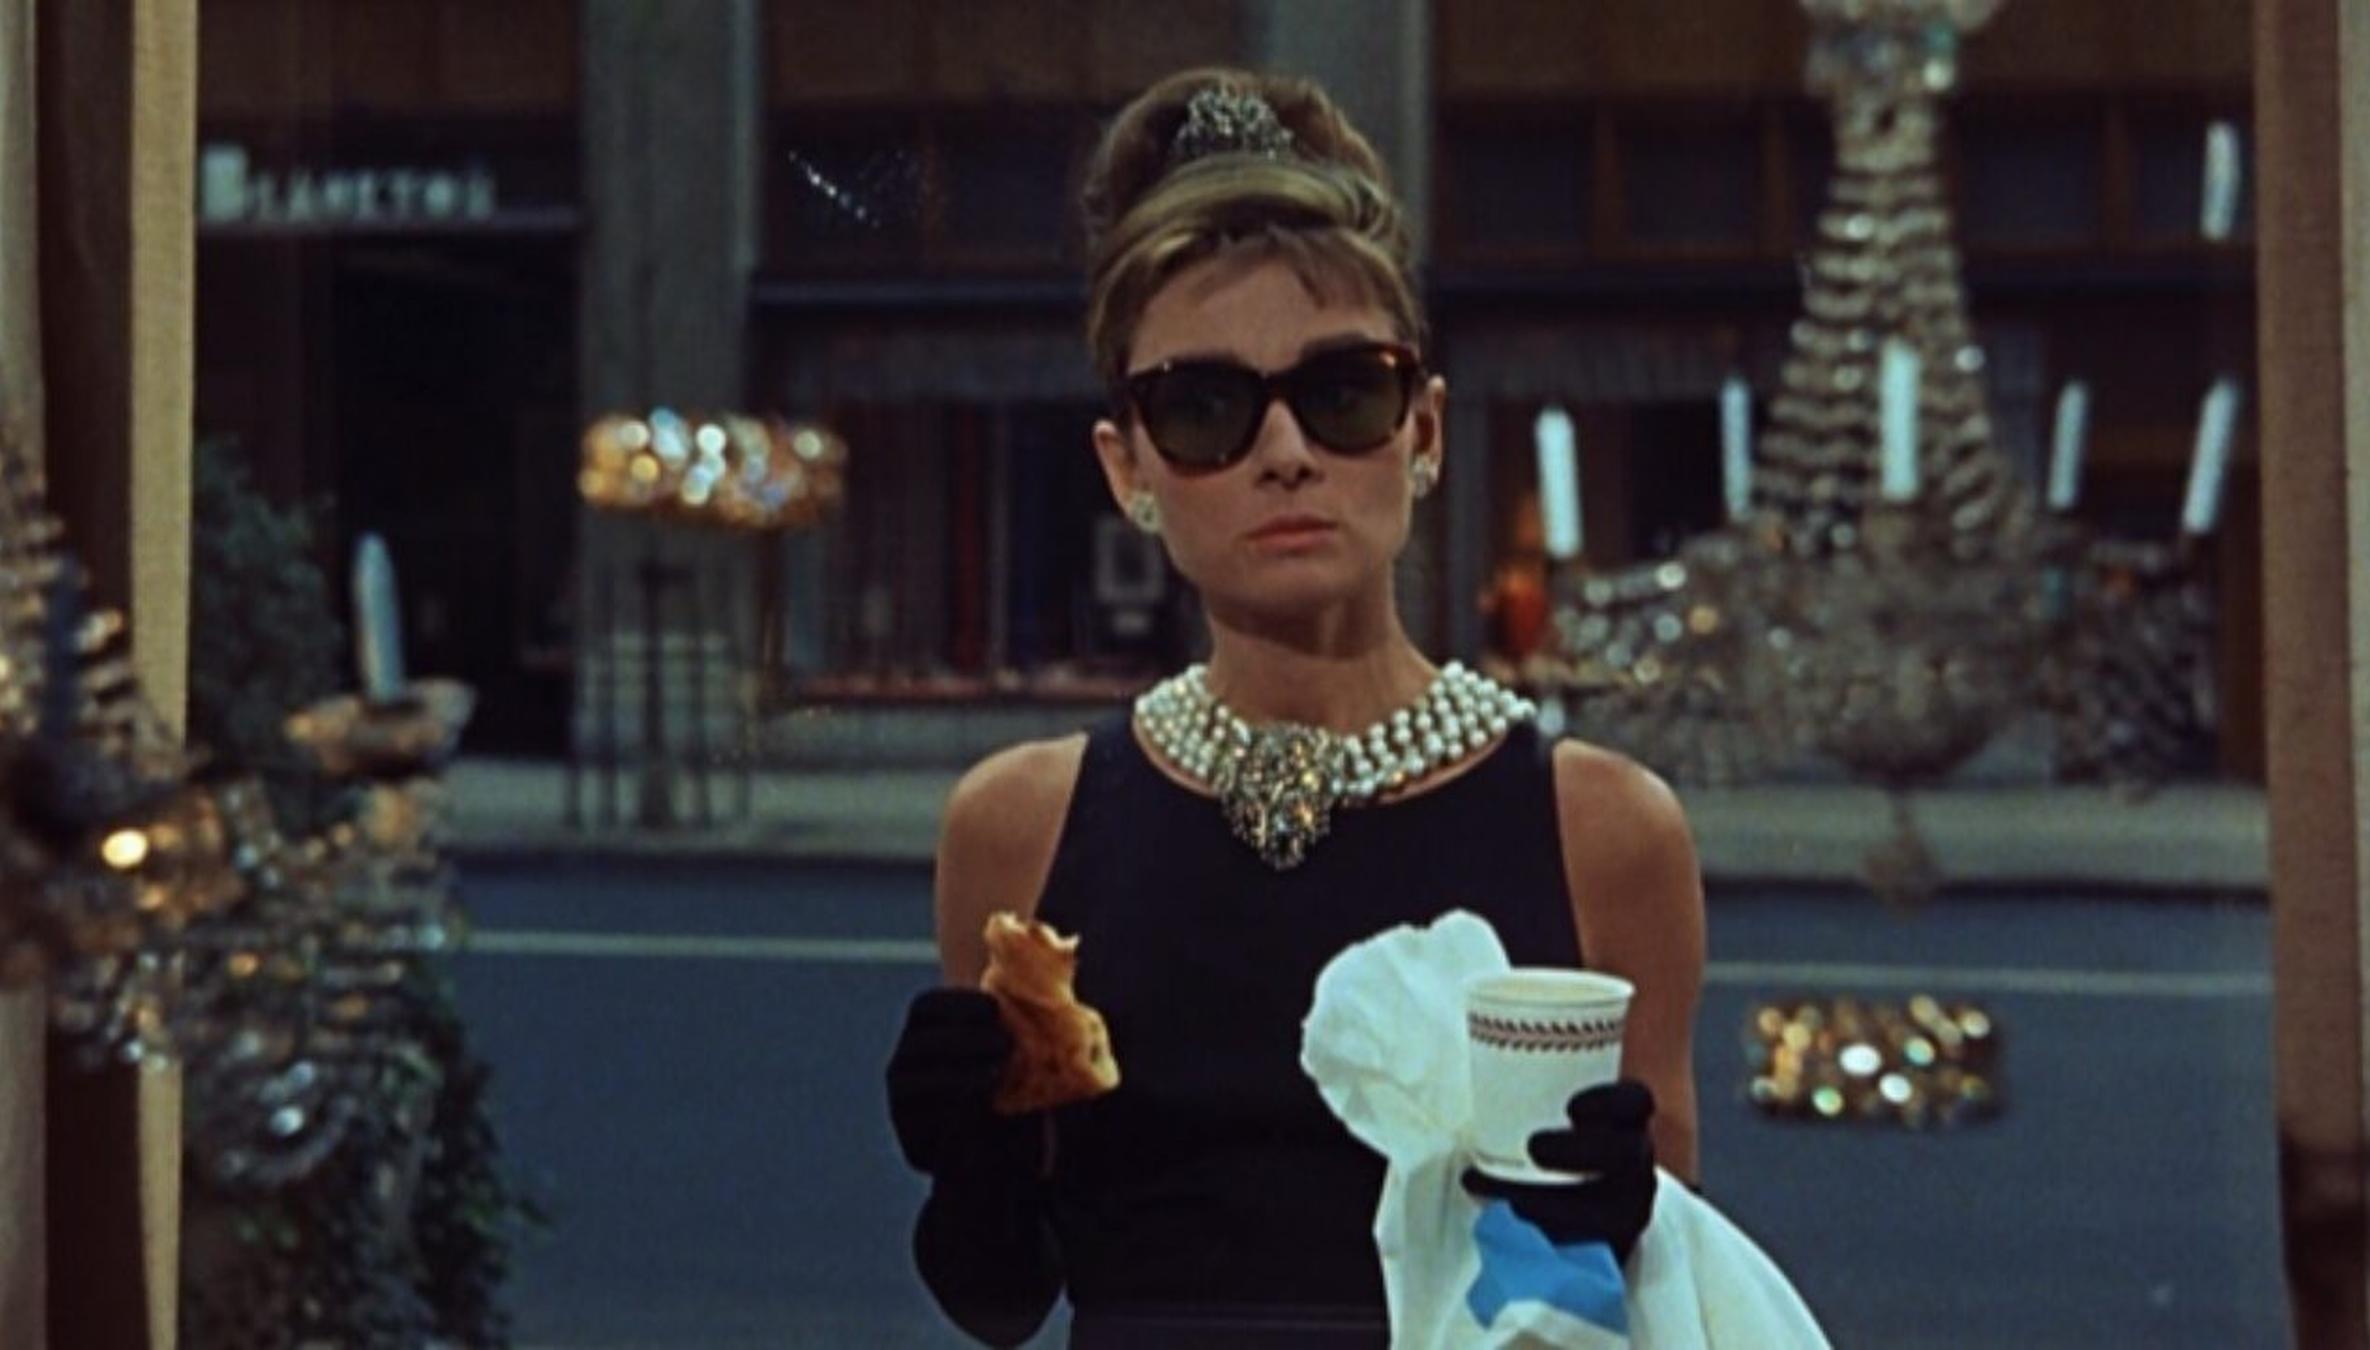 I Tried to Have Breakfast at Tiffany's - Racked